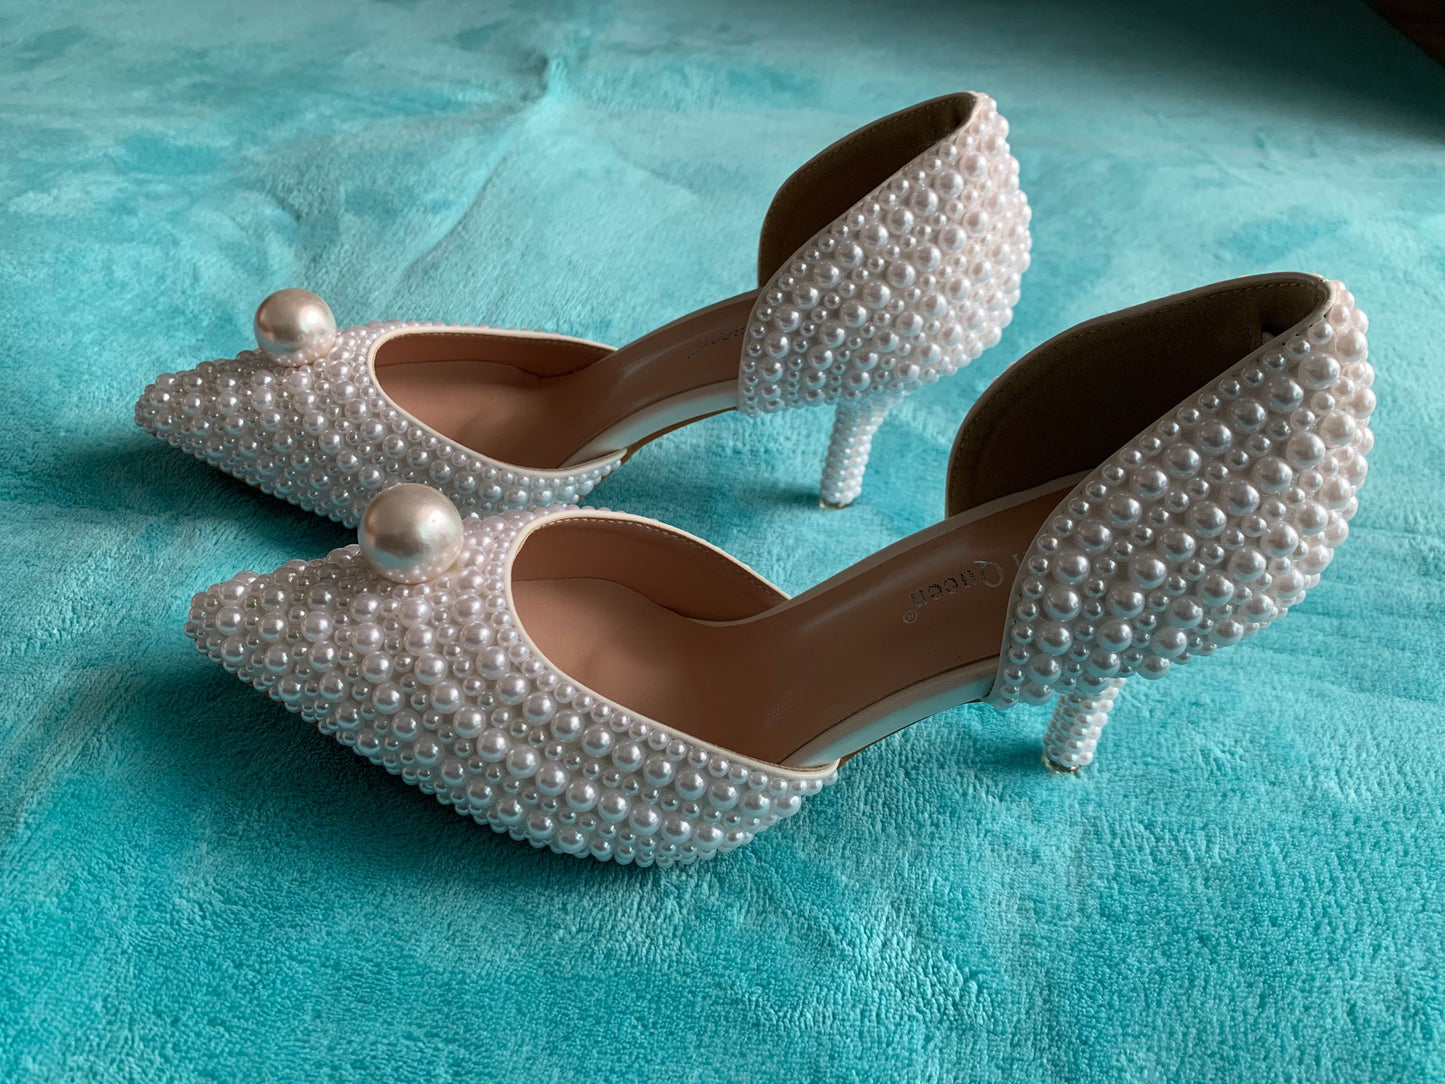 White Beads Big Pearl wedding shoes Bride Pointed Toe